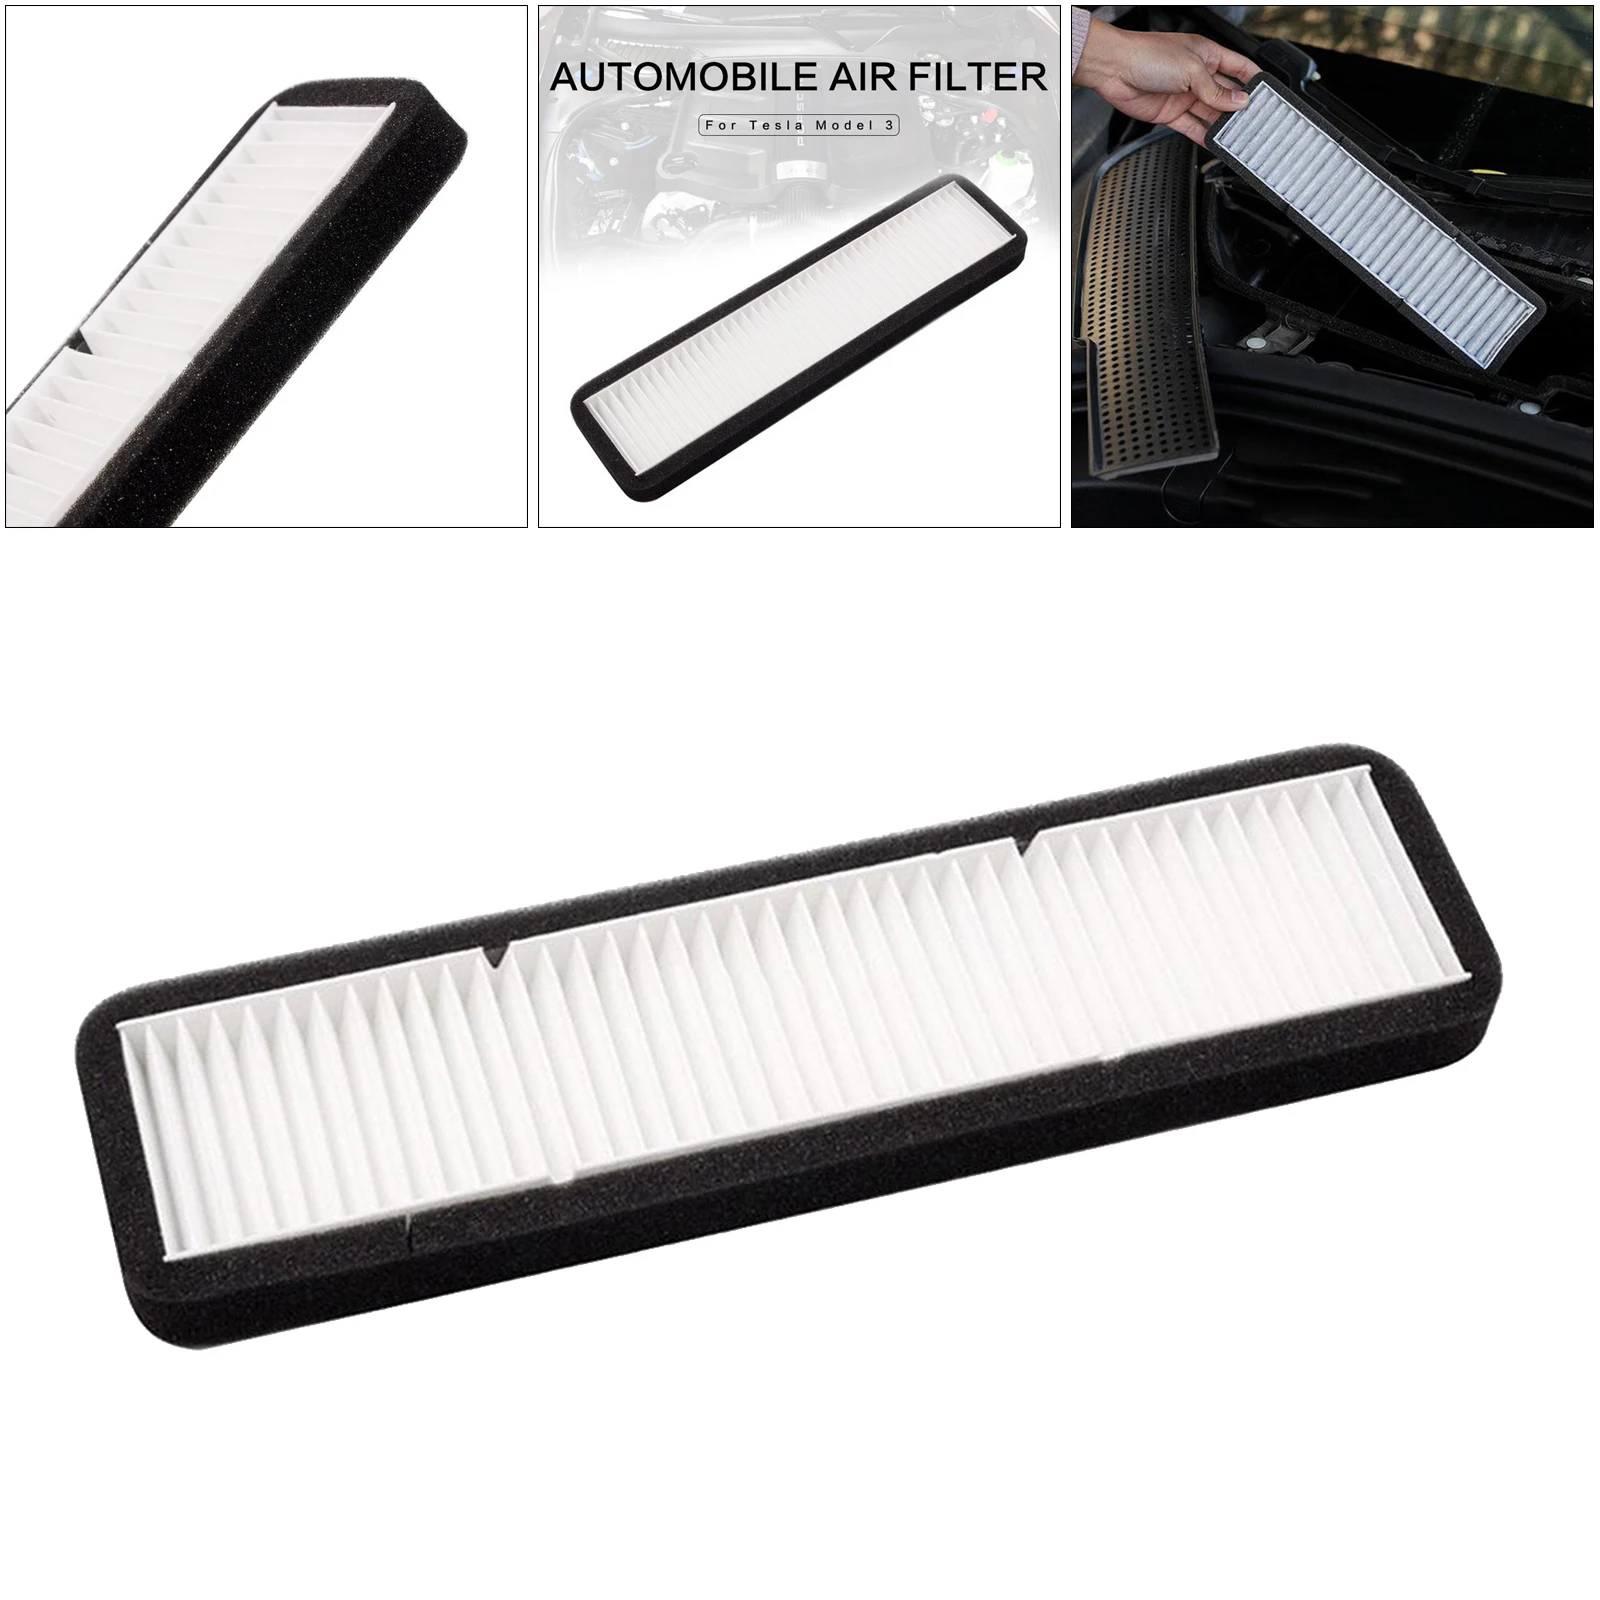 Applicable Air Conditioning Filter Conversion Activated Carbon Effective Blocking PM2.5 For Tesla Model 3 Accessories